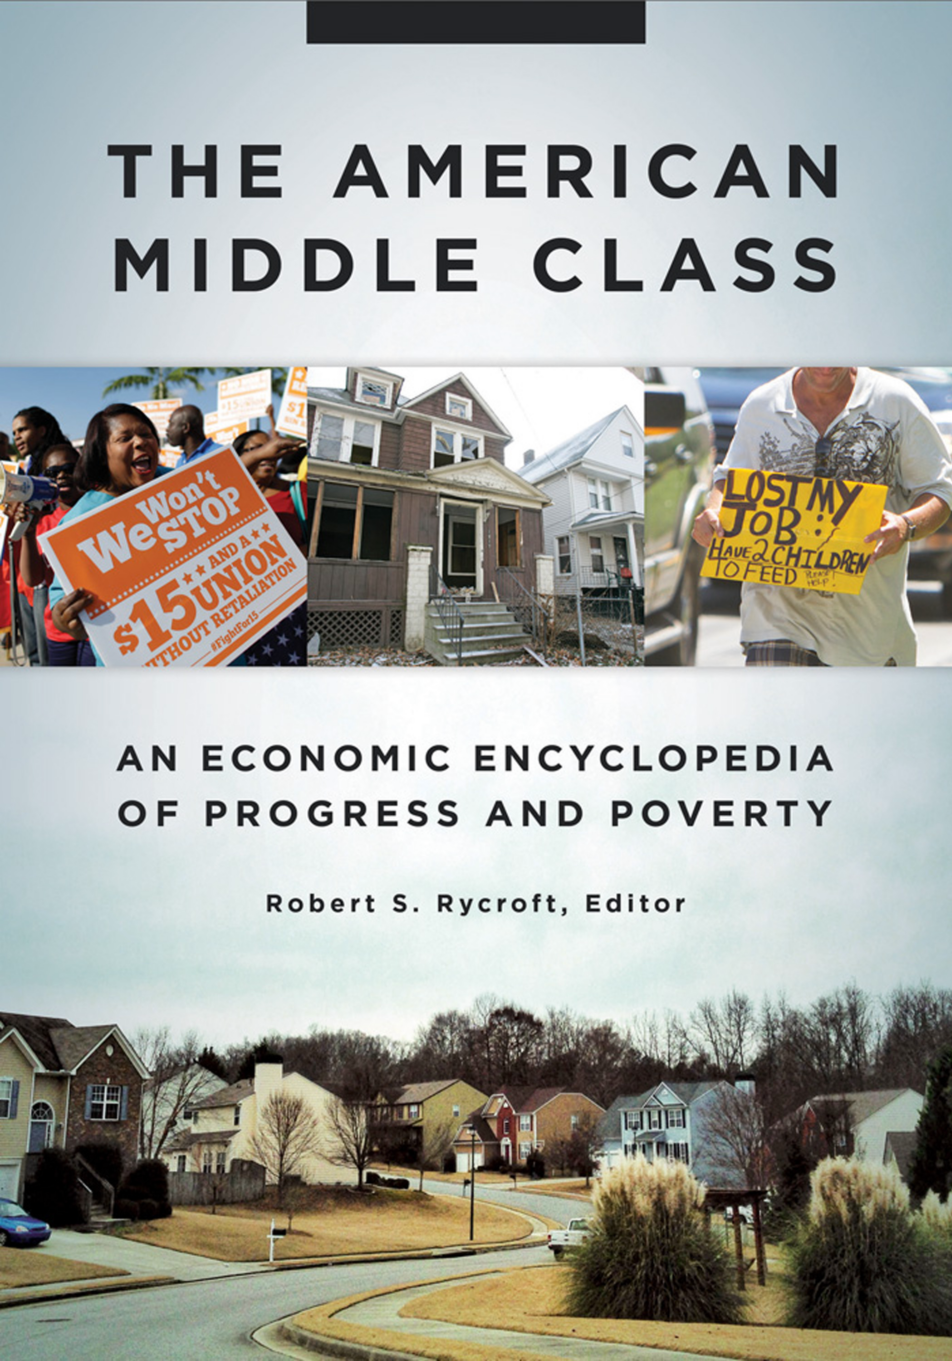 The American Middle Class: An Economic Encyclopedia of Progress and Poverty [2 volumes] page Cover1